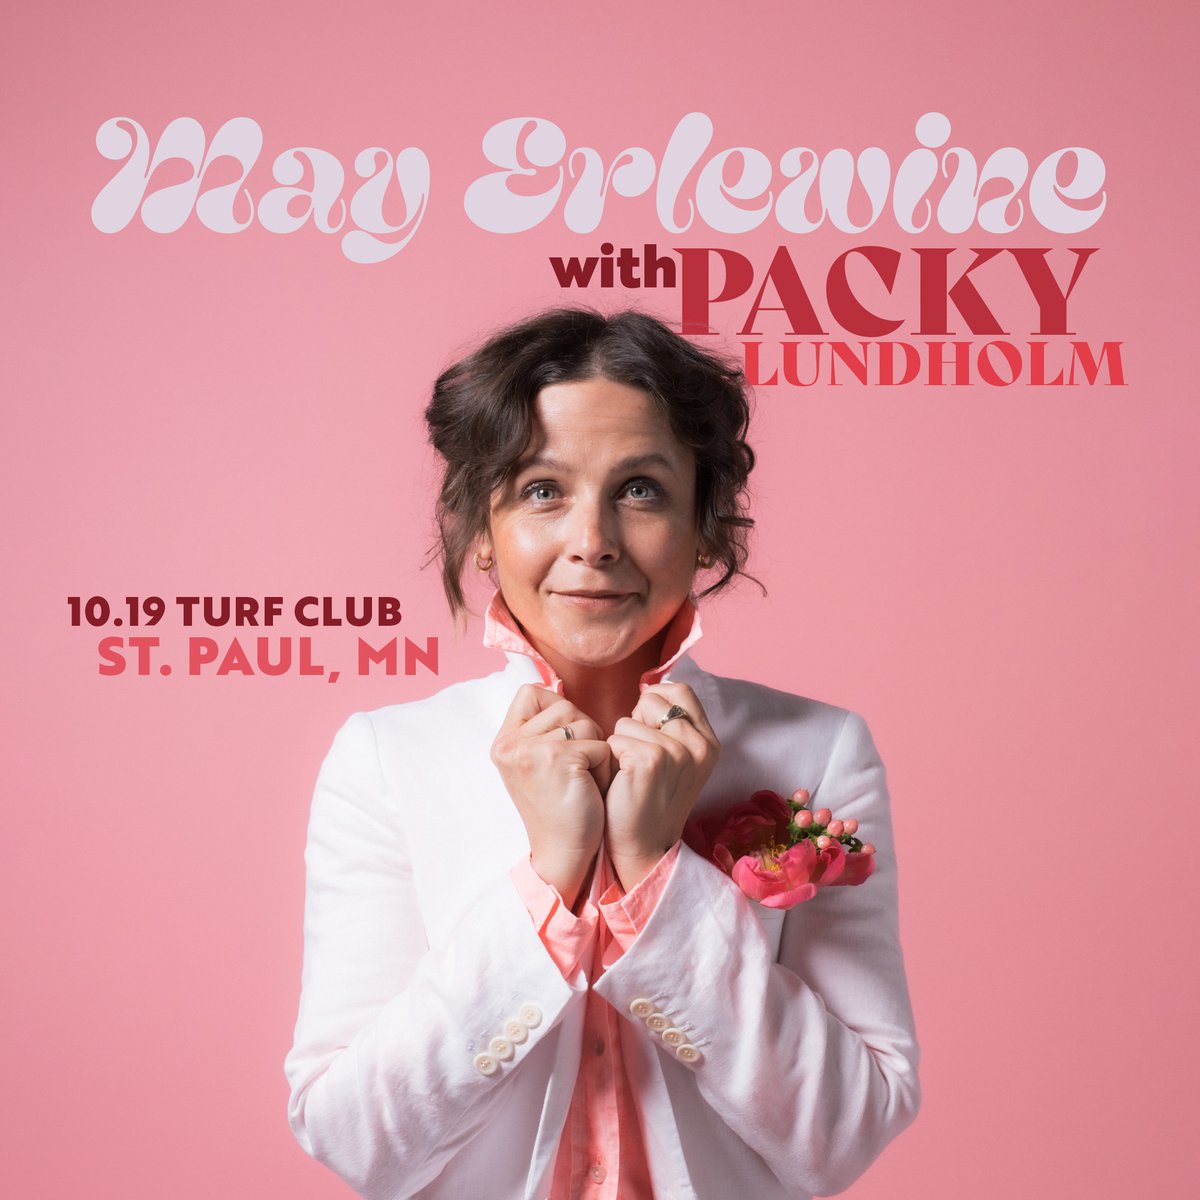 Just Announced: May Erlewine (@mayerlewine) with @PackyLundholm at the Turf Club on October 19. On sale now → firstavenue.me/3Cp6ktr